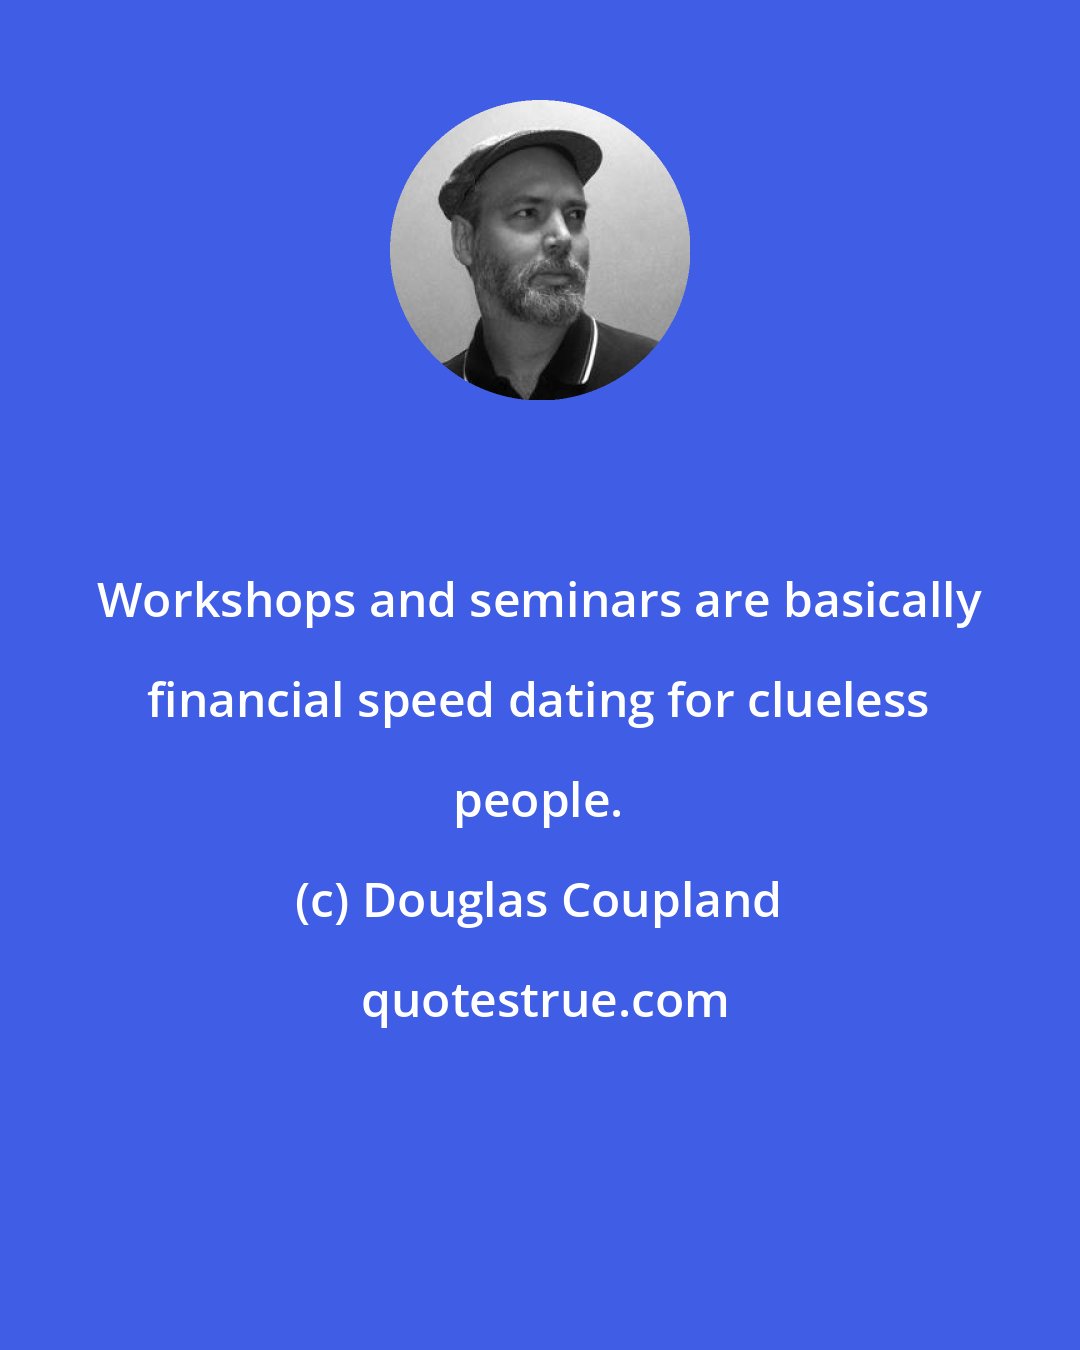 Douglas Coupland: Workshops and seminars are basically financial speed dating for clueless people.